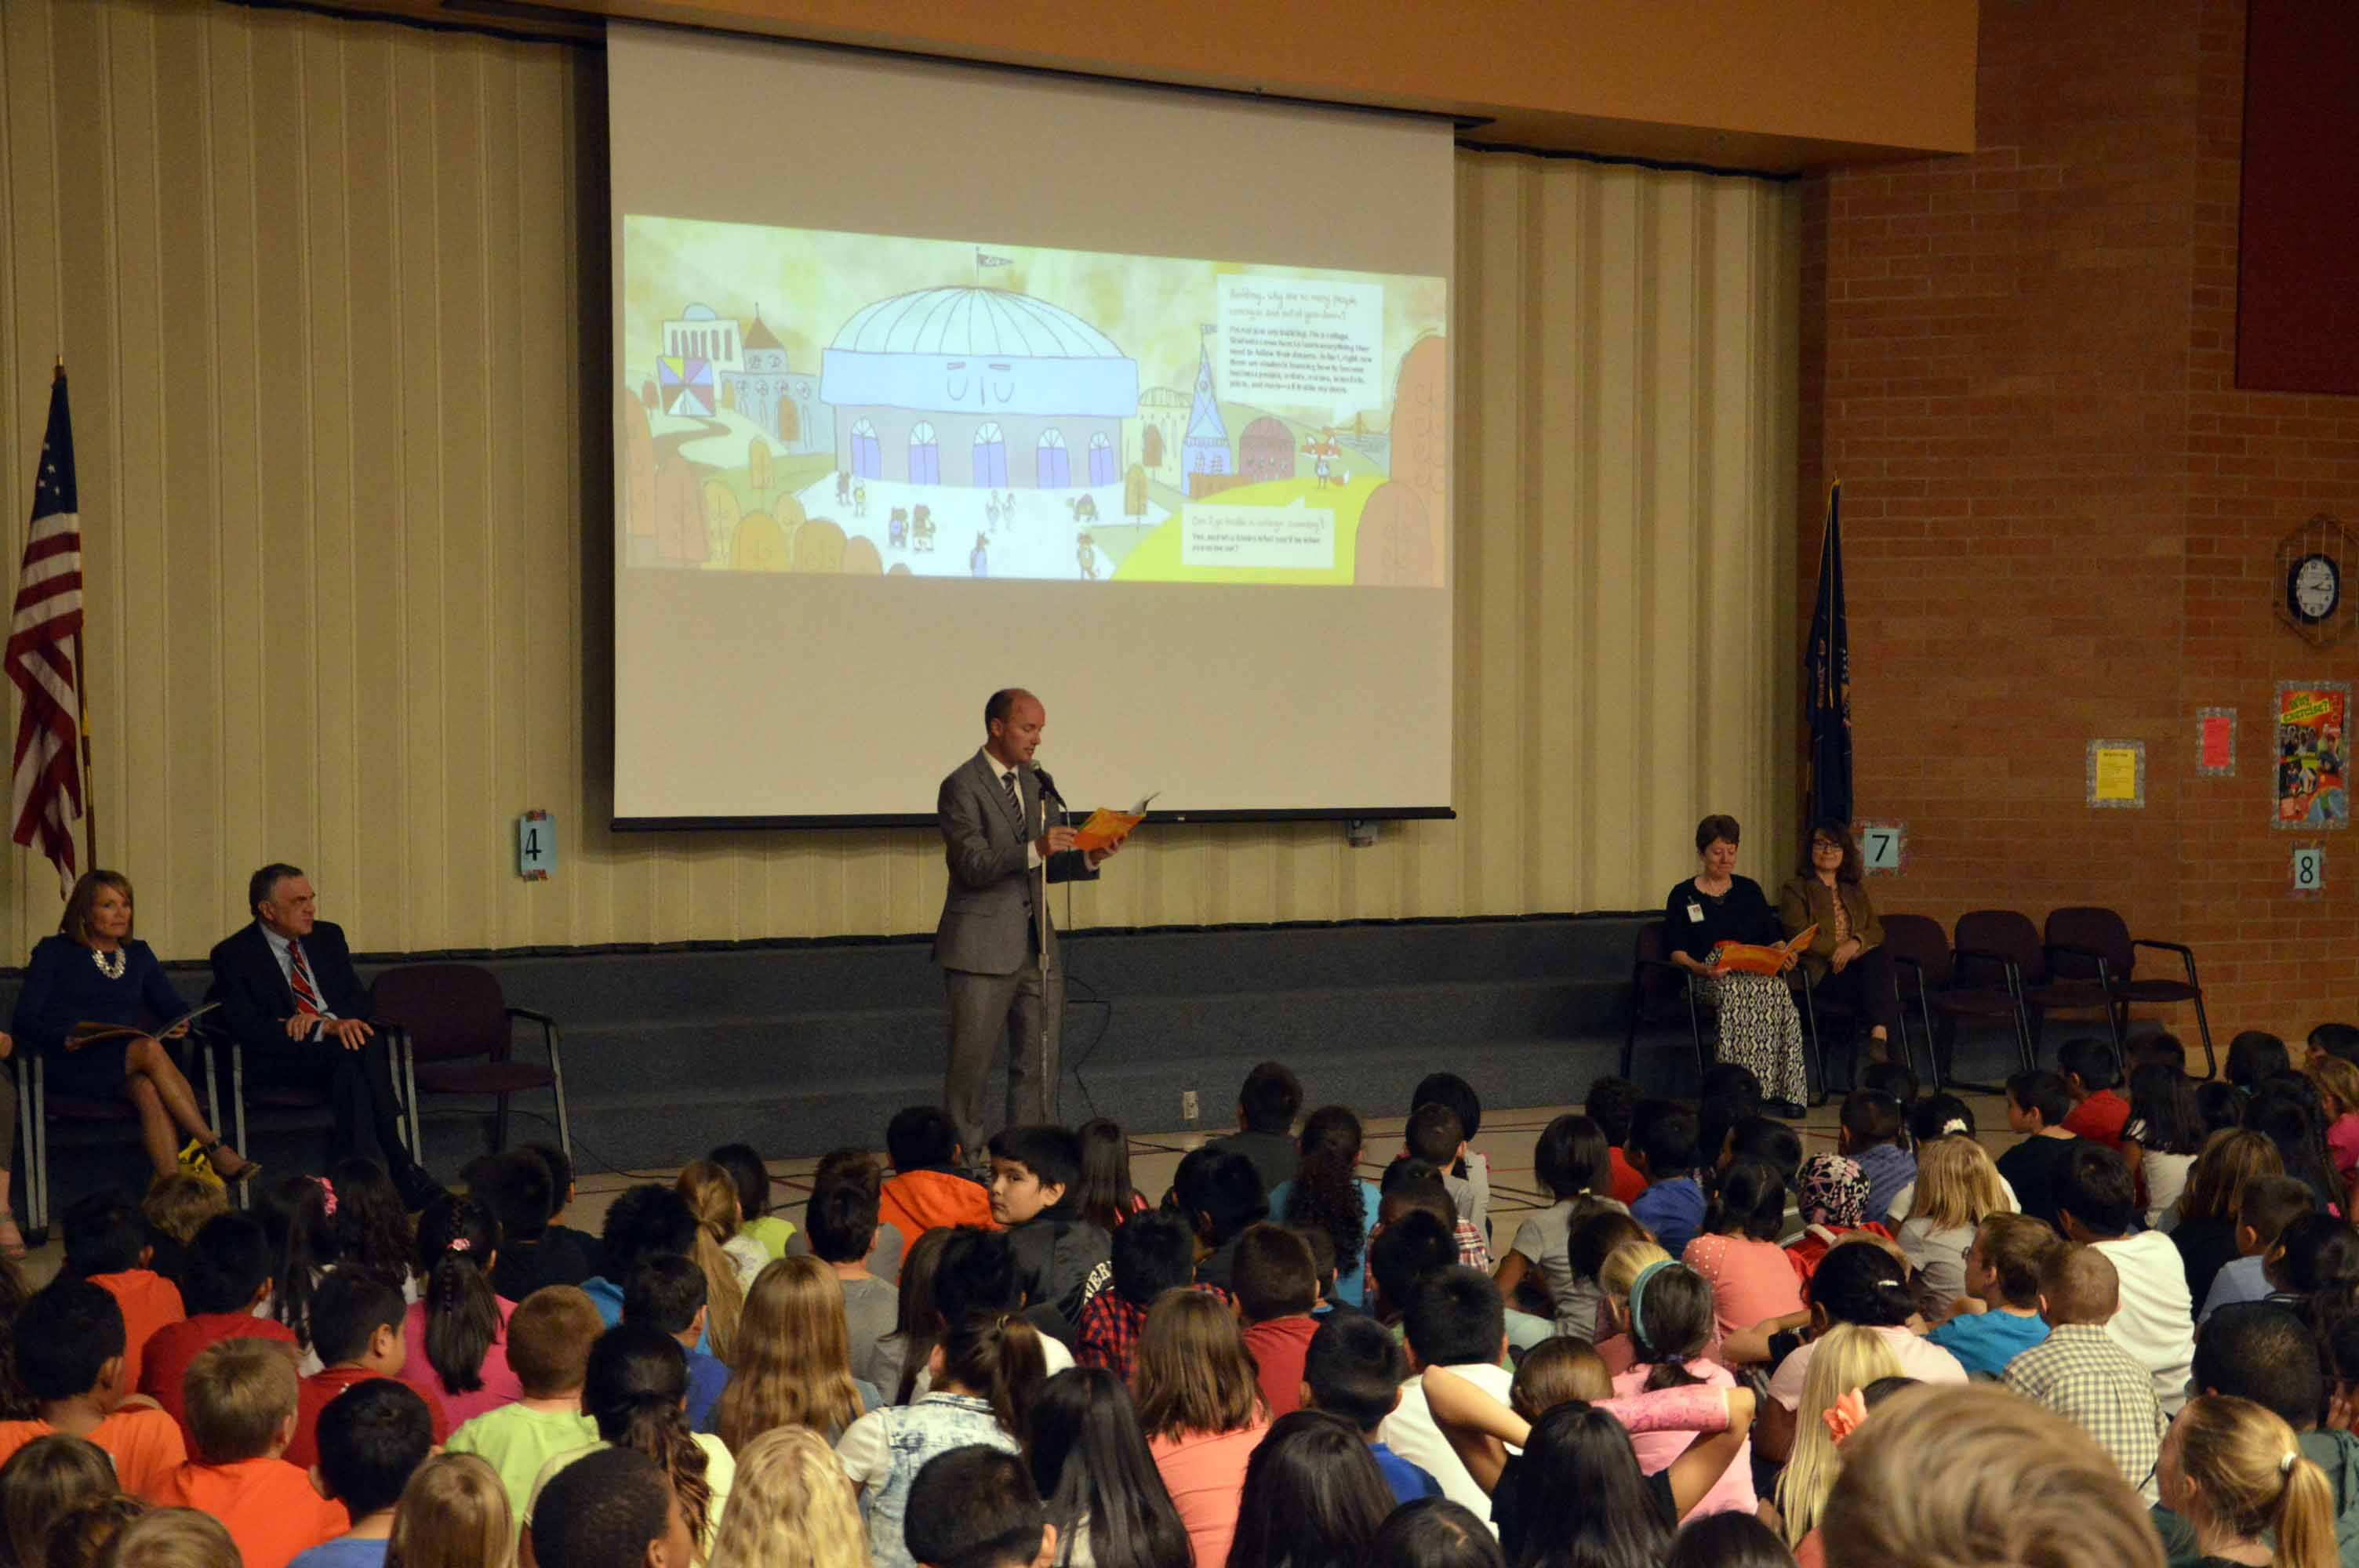 New book about preparing for college debuts at Beehive Elementary